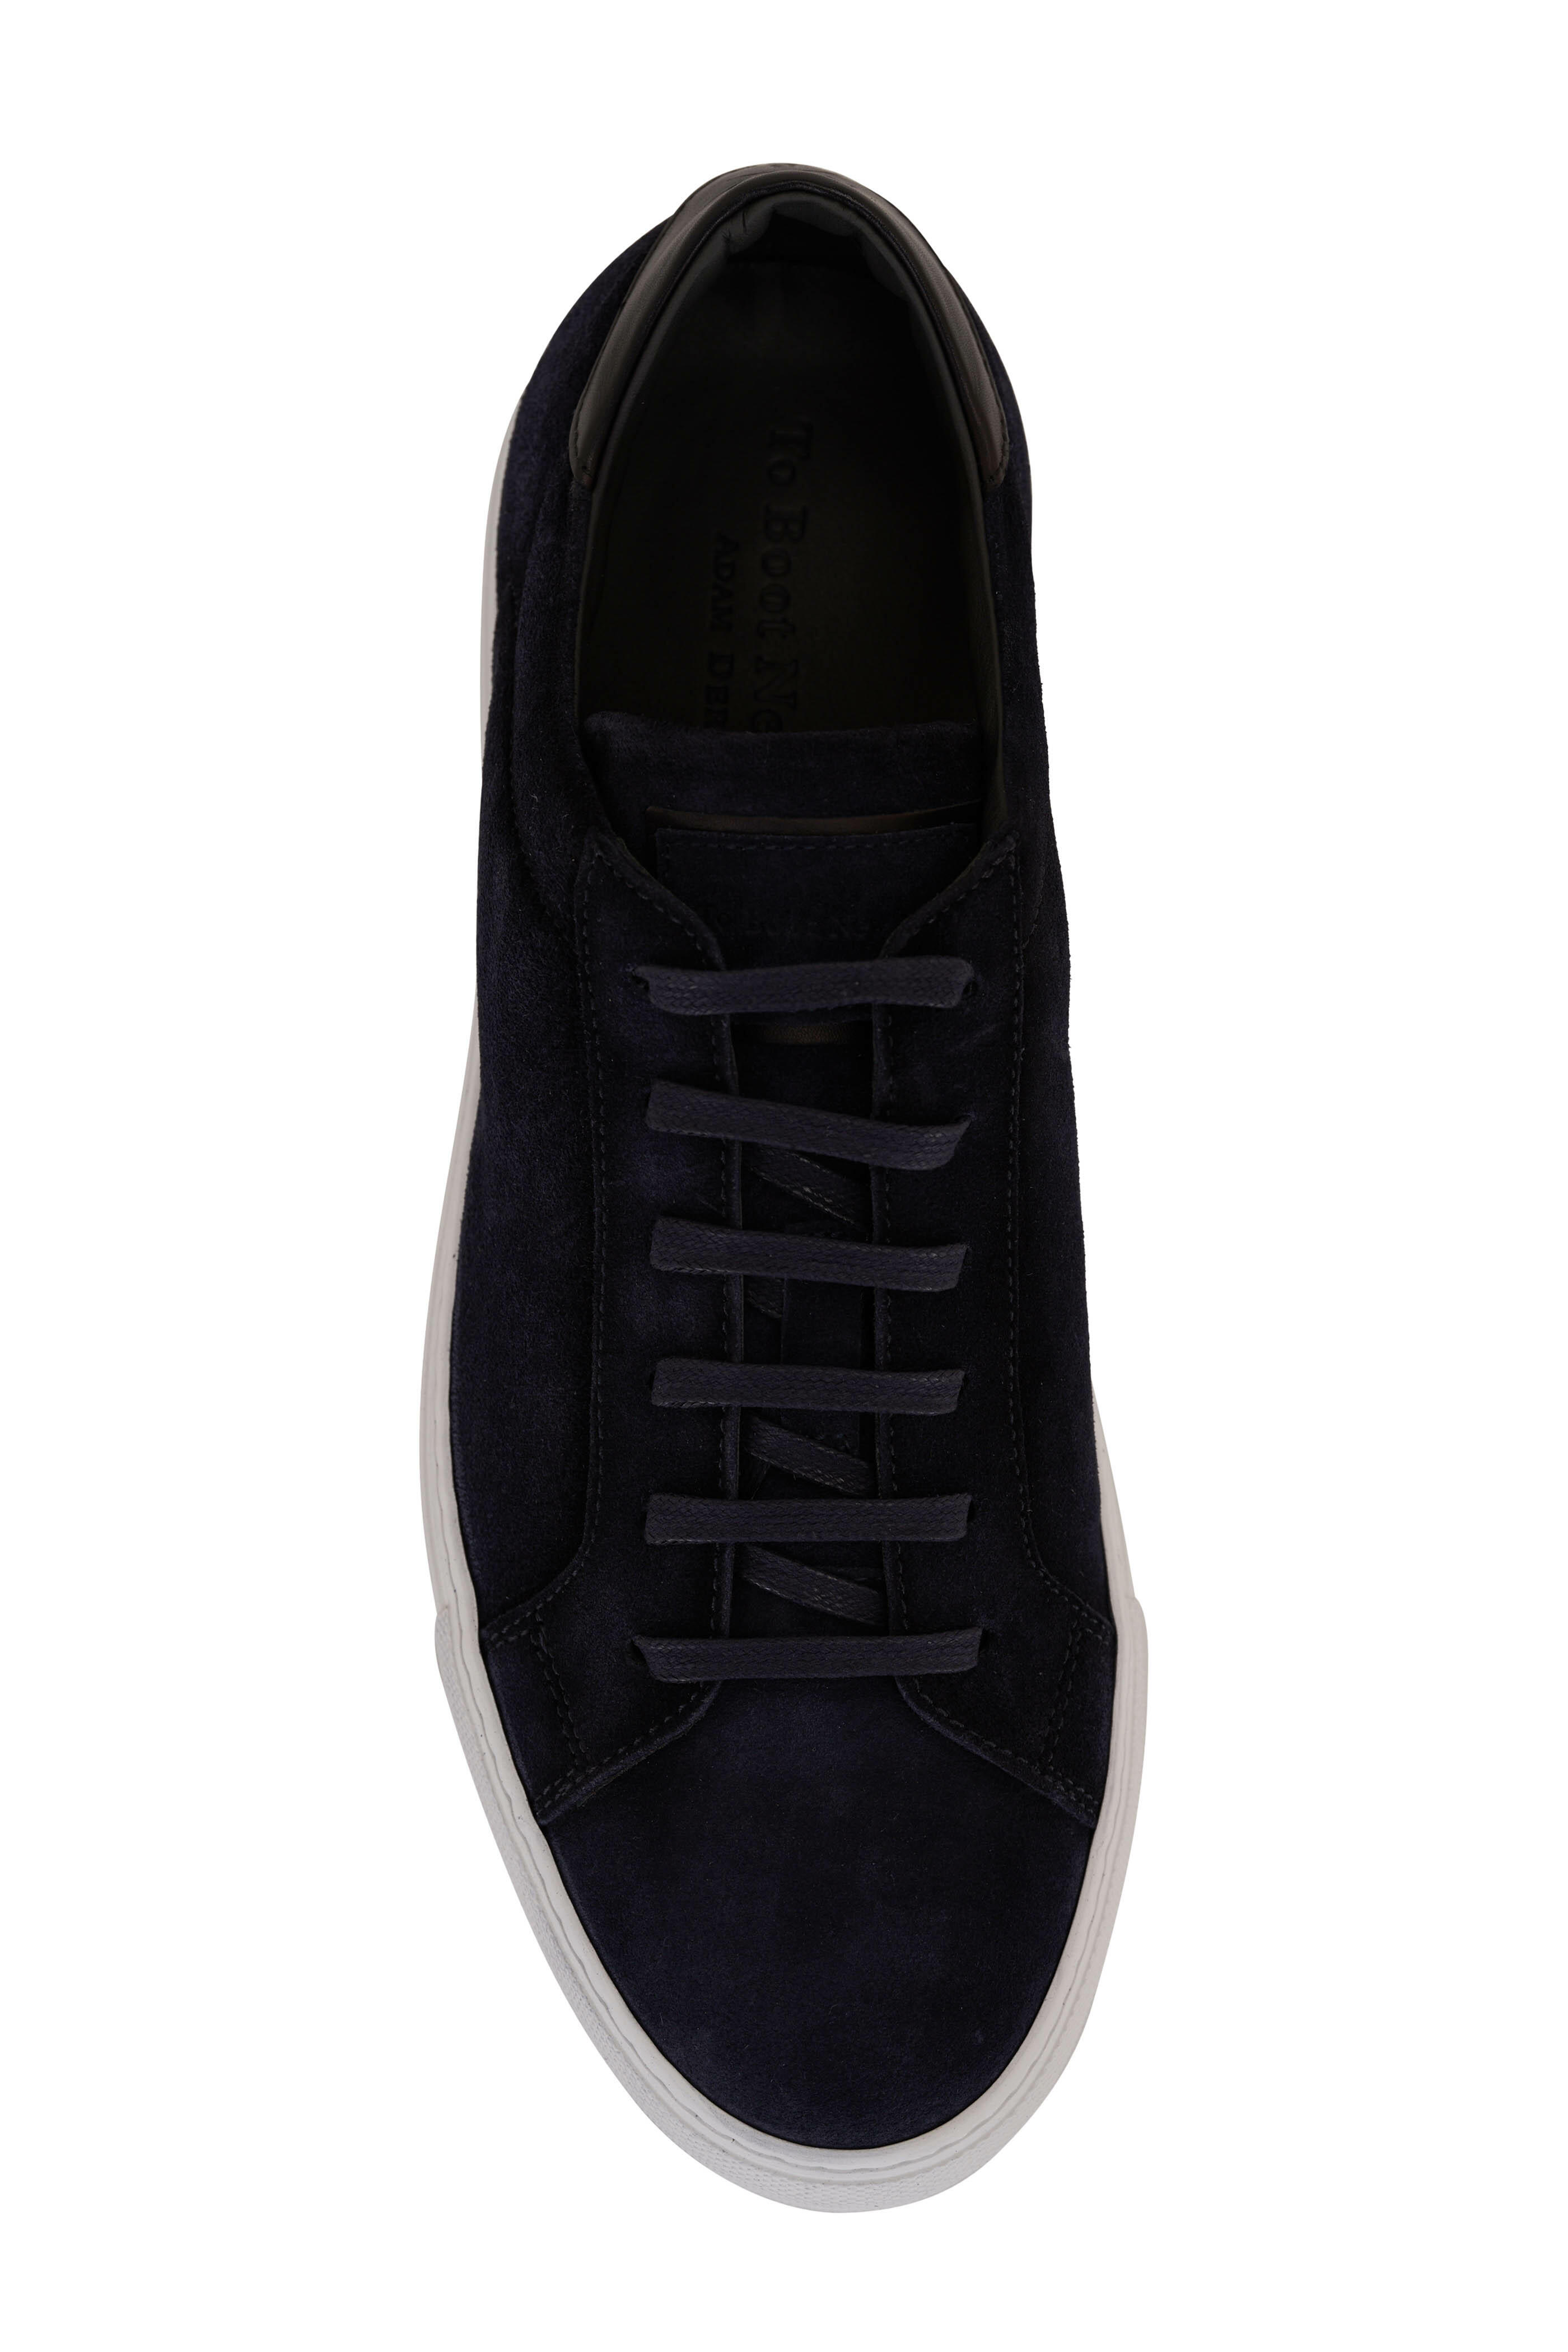 To Boot New York - Derrick Navy Suede Sneaker | Mitchell Stores